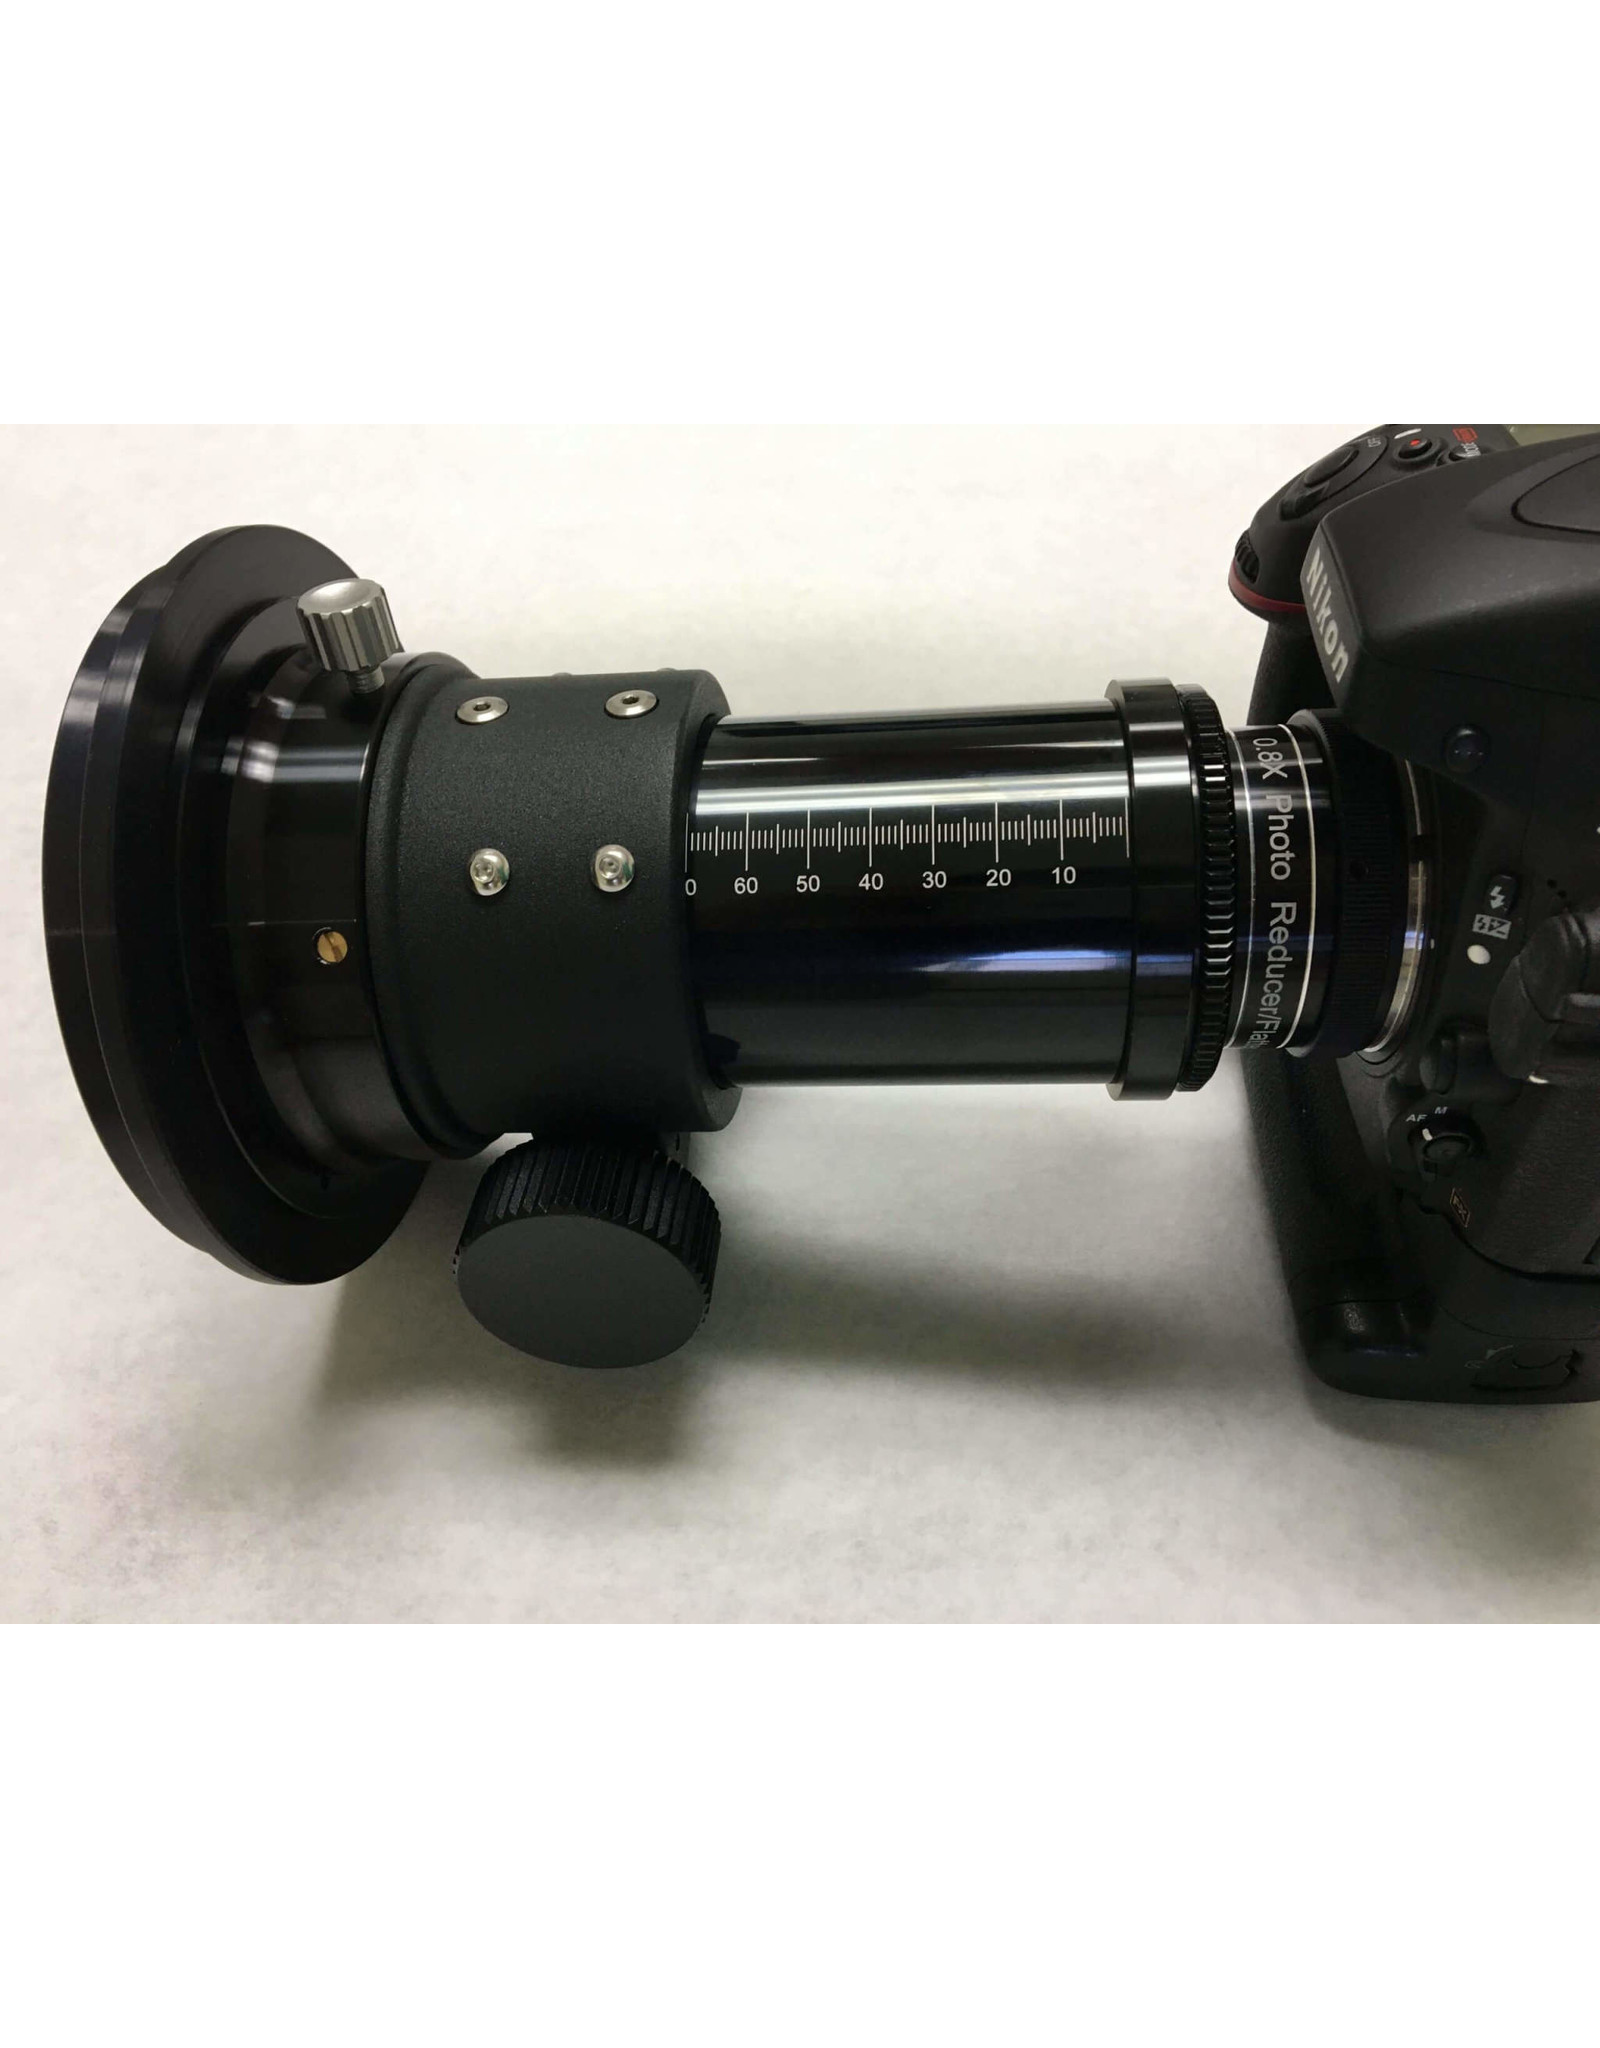 Lunt Lunt 0.8X Reducer/Field Flattener for Nighttime Imaging with the MT80, MT100 & MT130